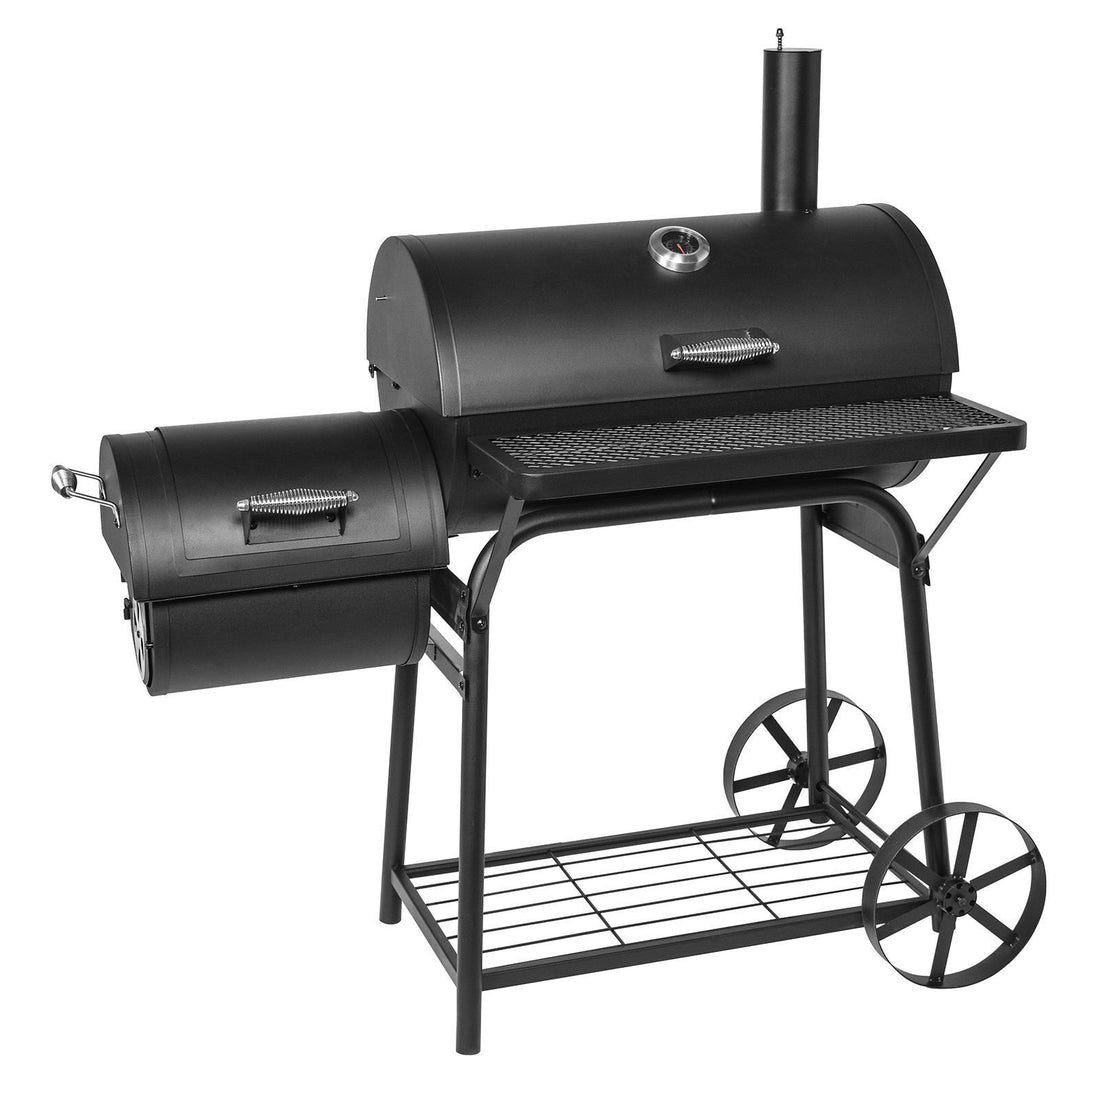 Havana Outdoors Charcoal 2-IN-1 BBQ Smoker Grill Barbecue Outdoor Cooking-Barbecues-PEROZ Accessories